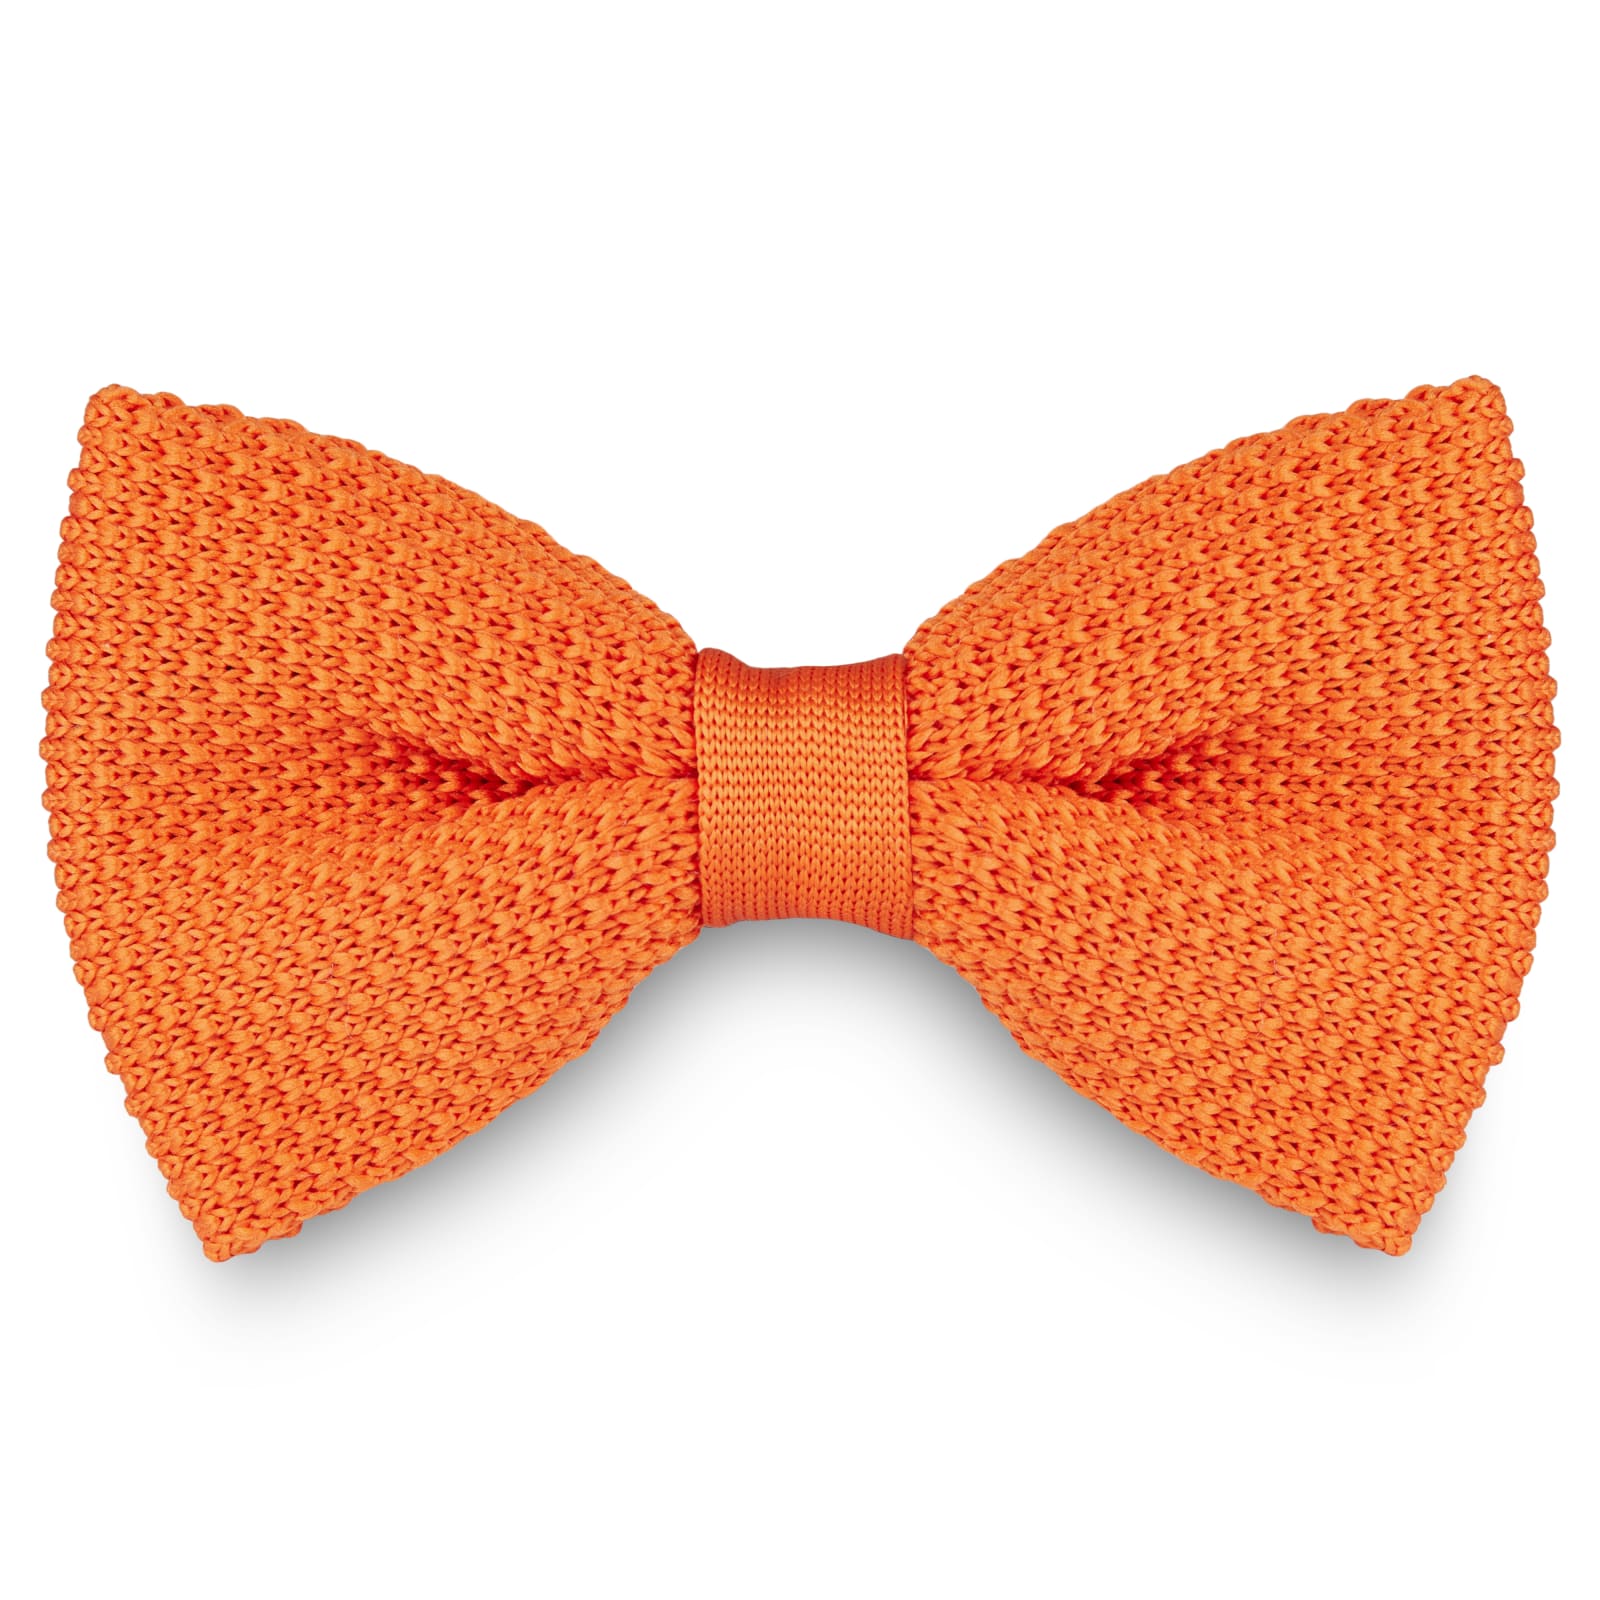 ORANGE/TERRACOTTA KNITTED BOW TIES